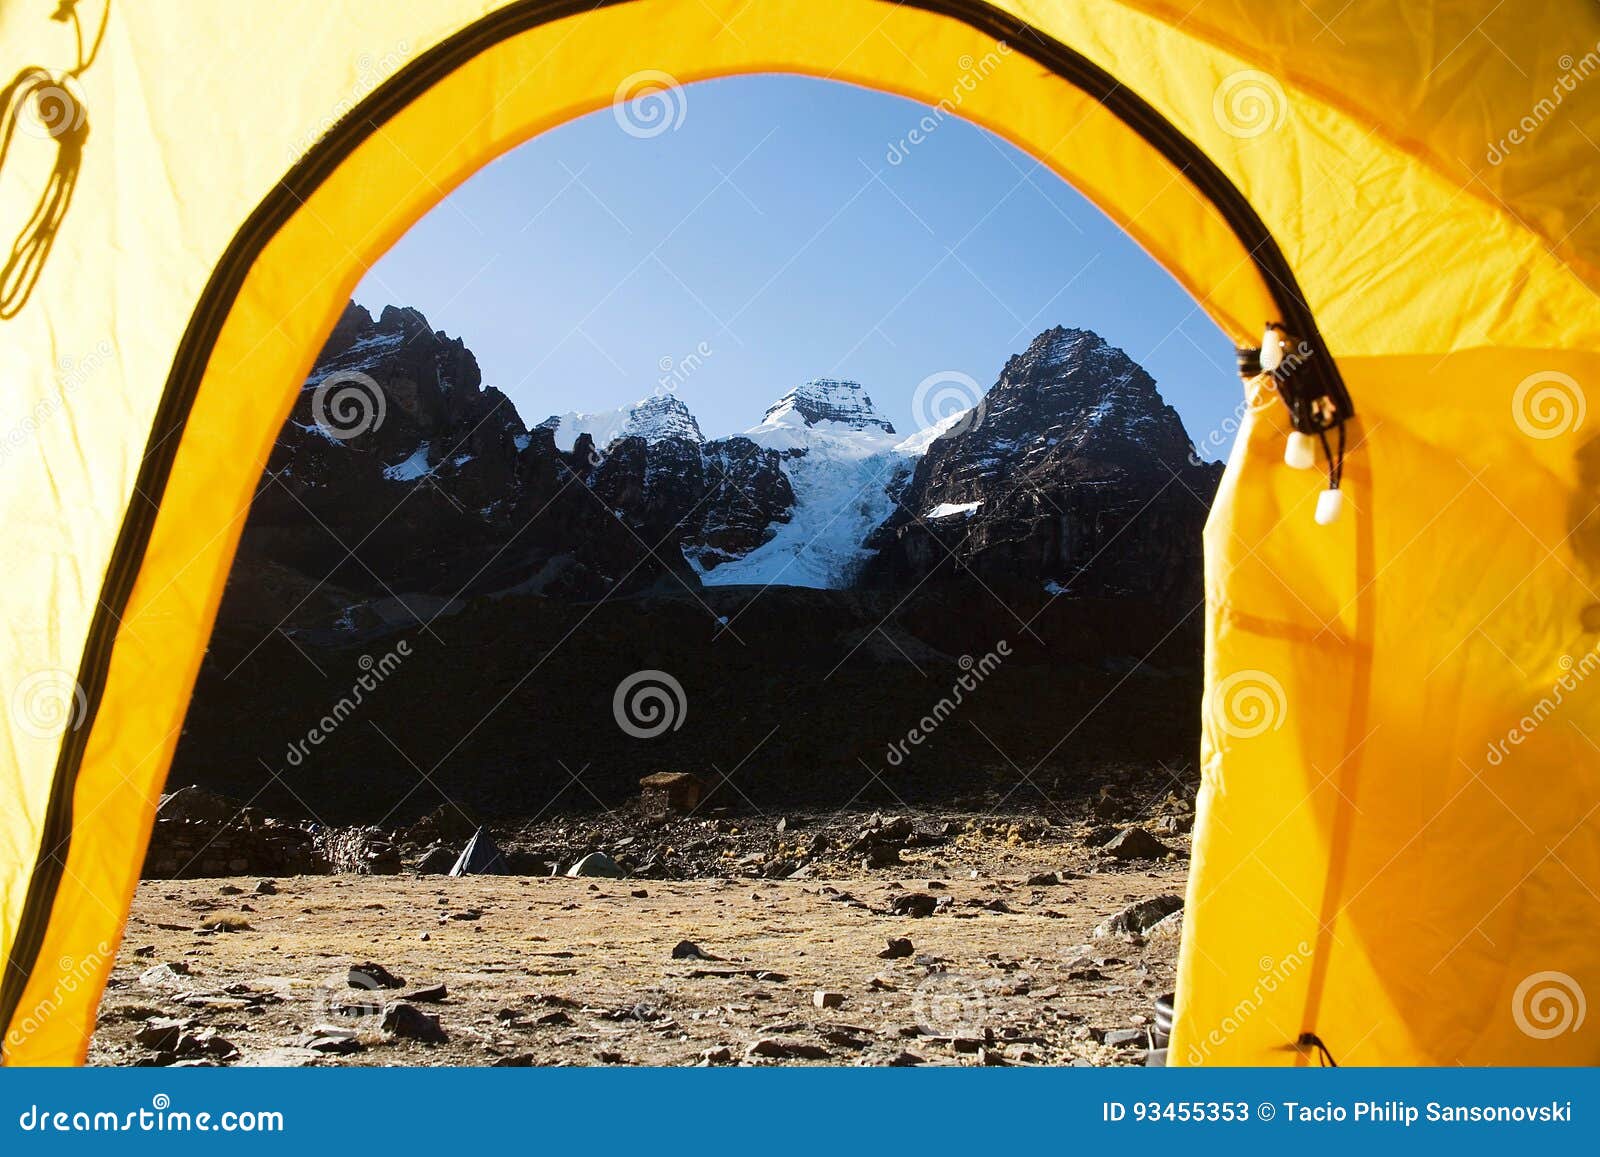 cabeza del condor mountains seen from basecamp from inside tent